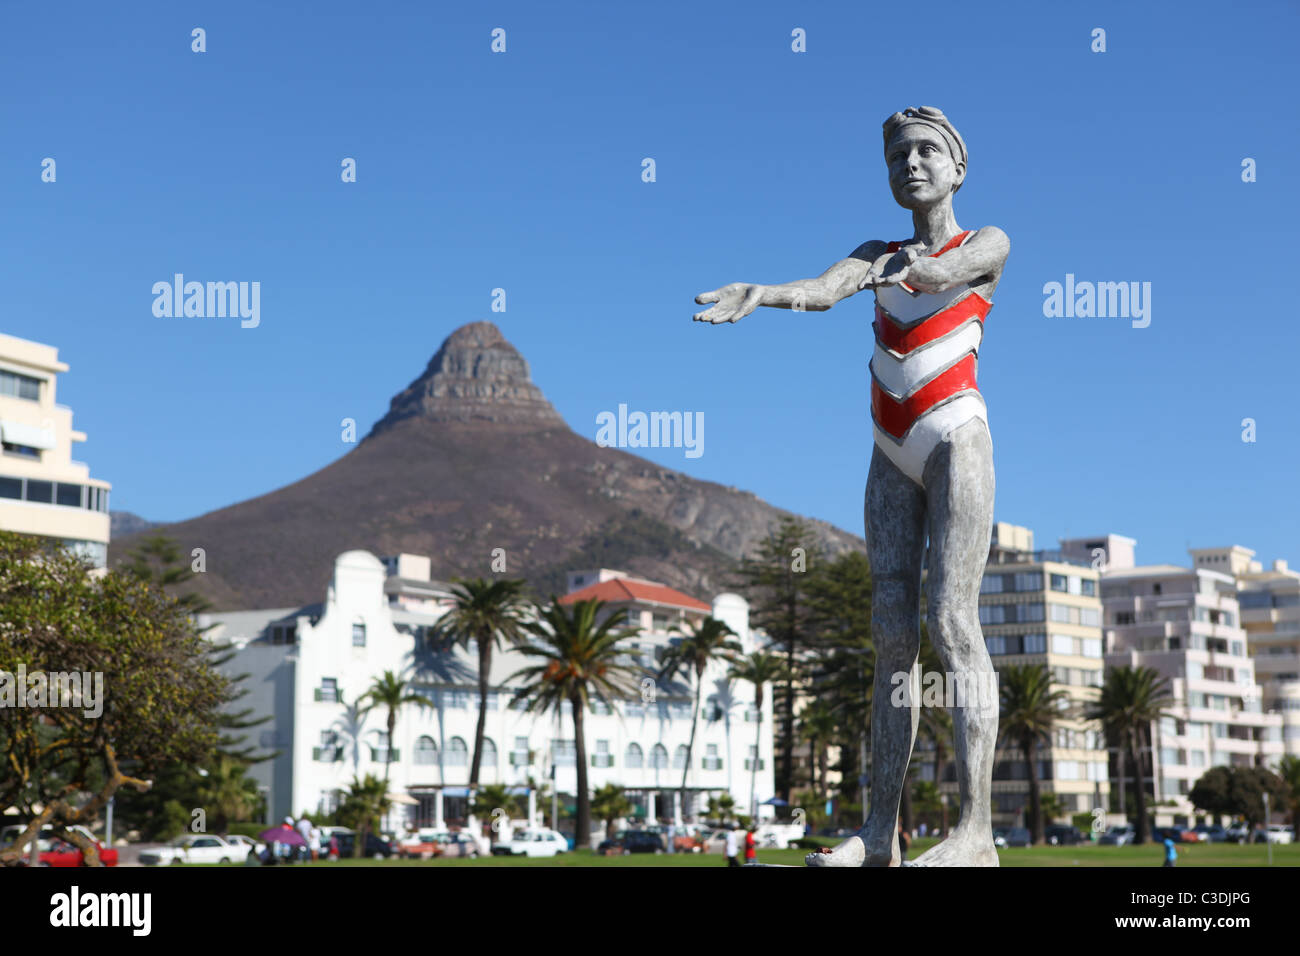 Der Gegend namens "Sea Point' in Cape Town, South Africa. Stockfoto